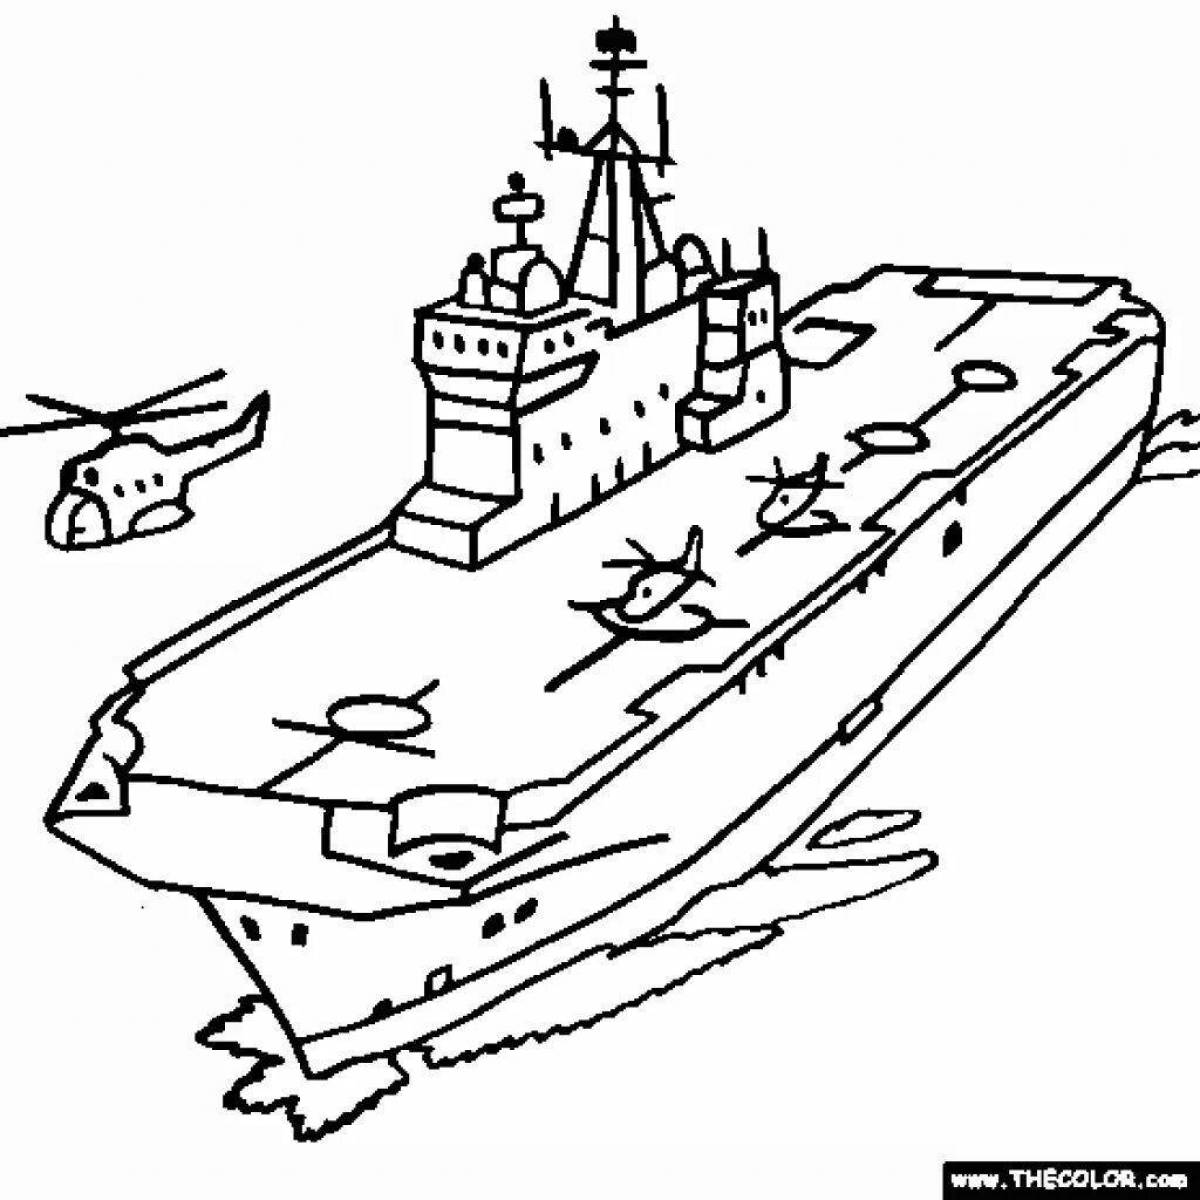 Playful warship coloring page for kids